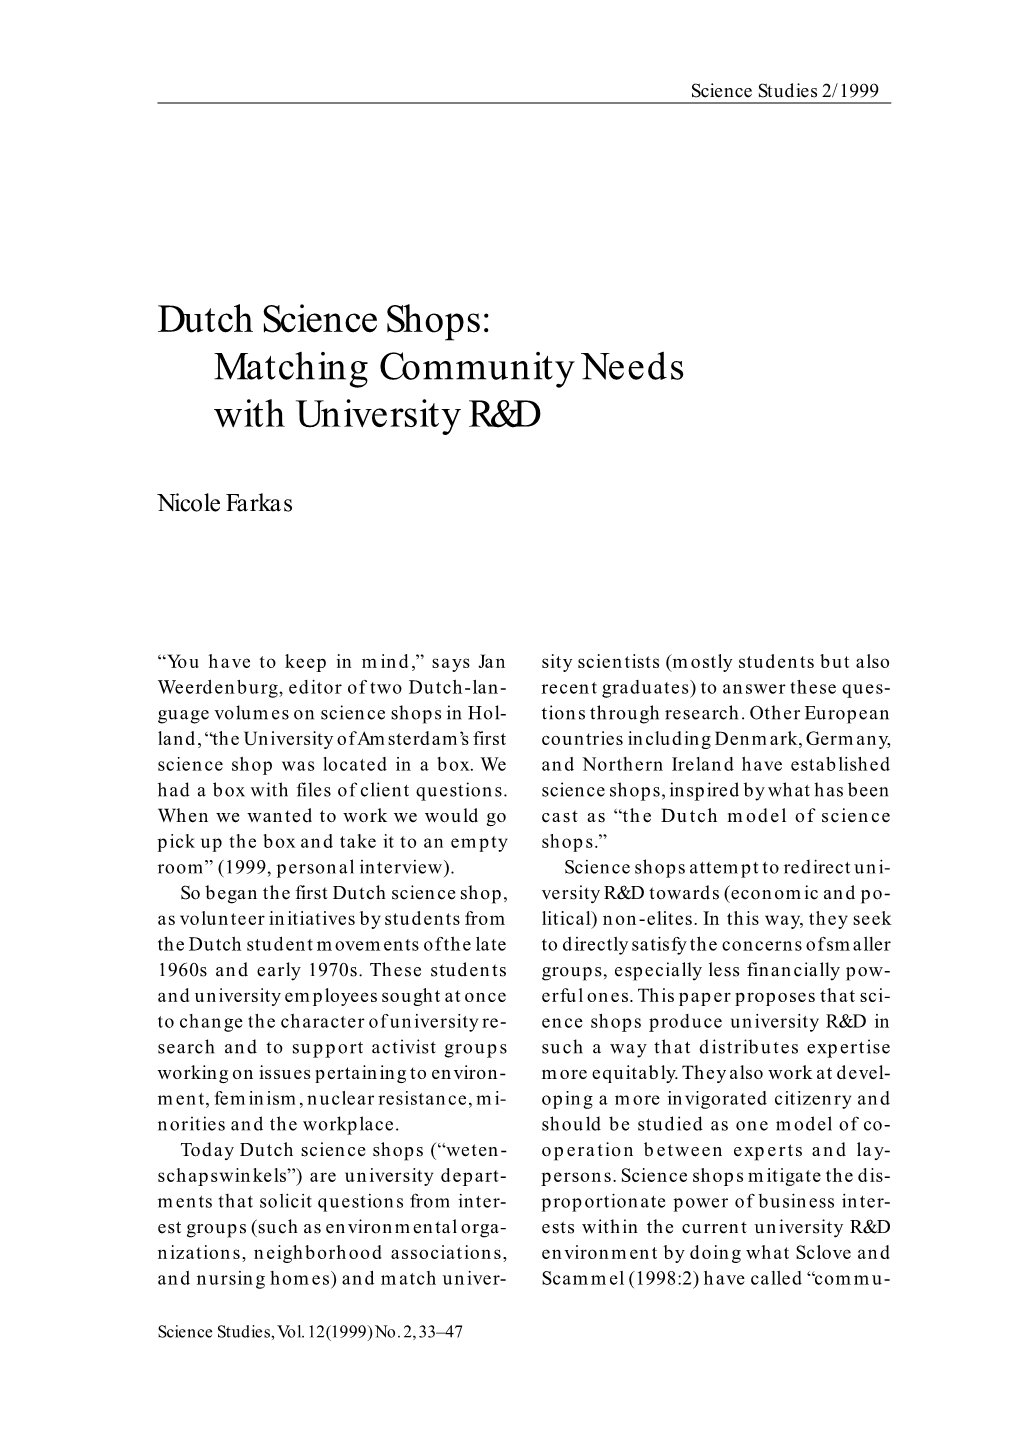 Dutch Science Shops: Matching Community Needs with University R&D